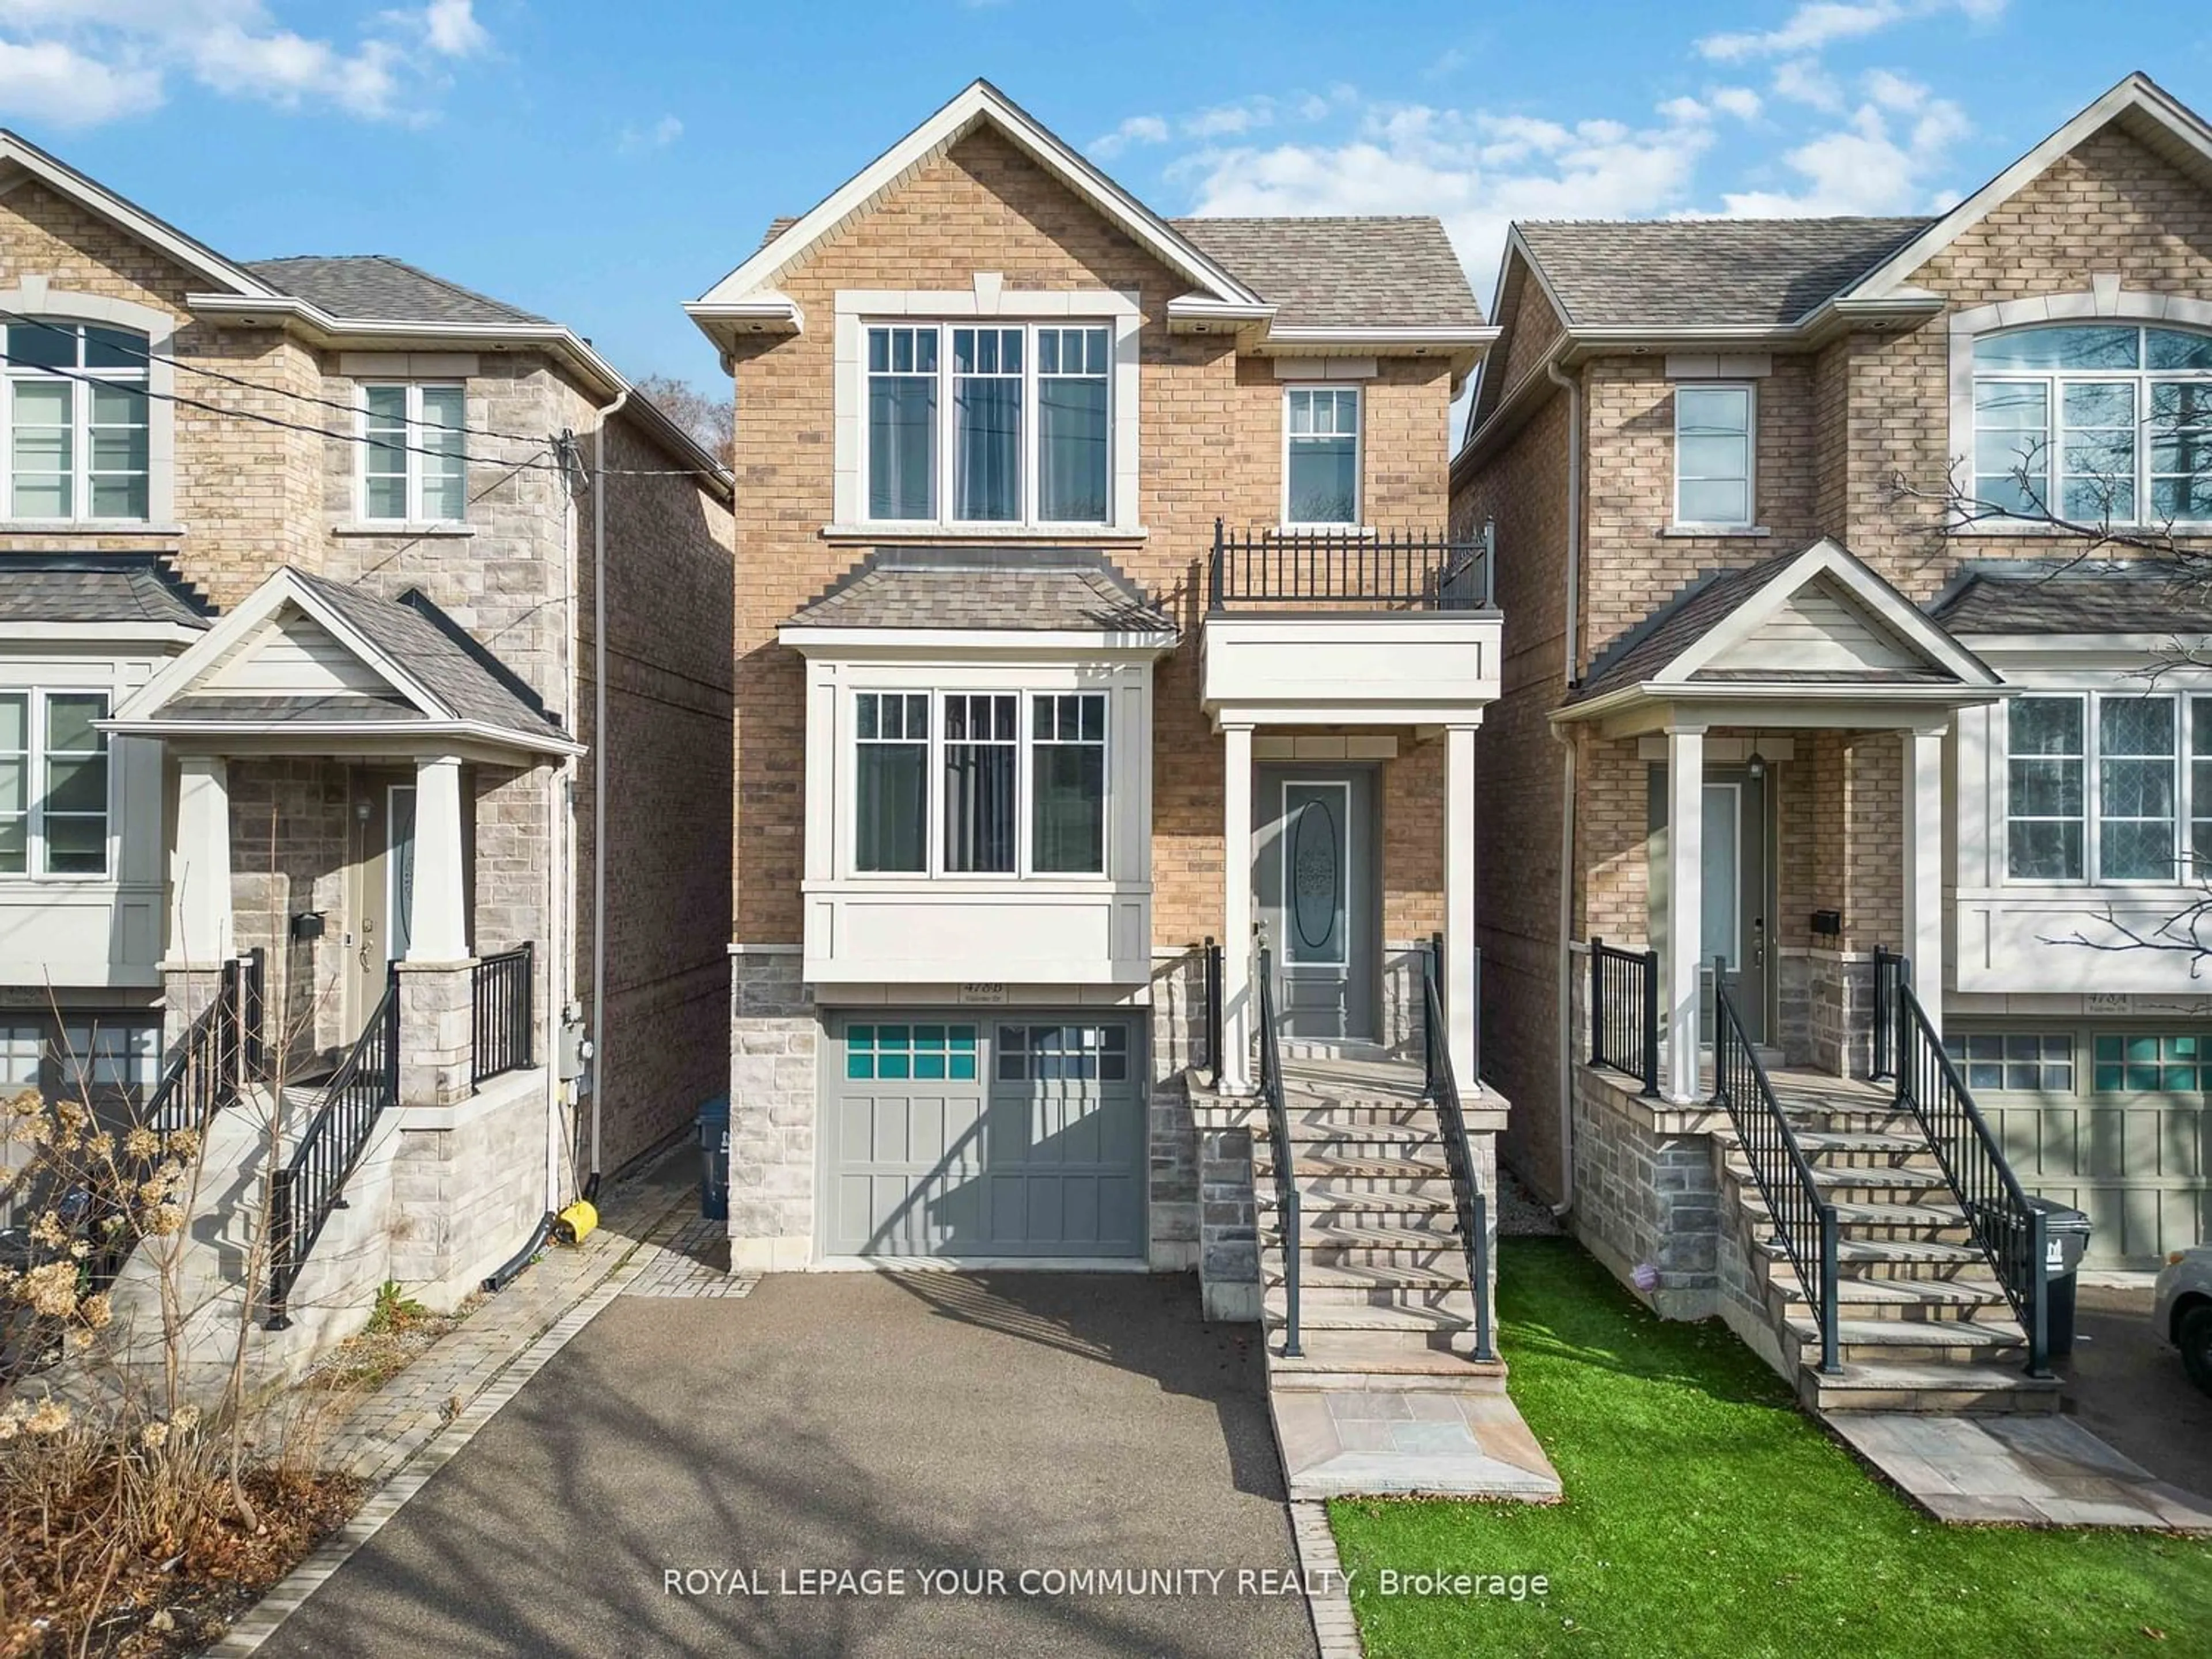 Frontside or backside of a home for 478B Valermo Dr, Toronto Ontario M8W 2M7